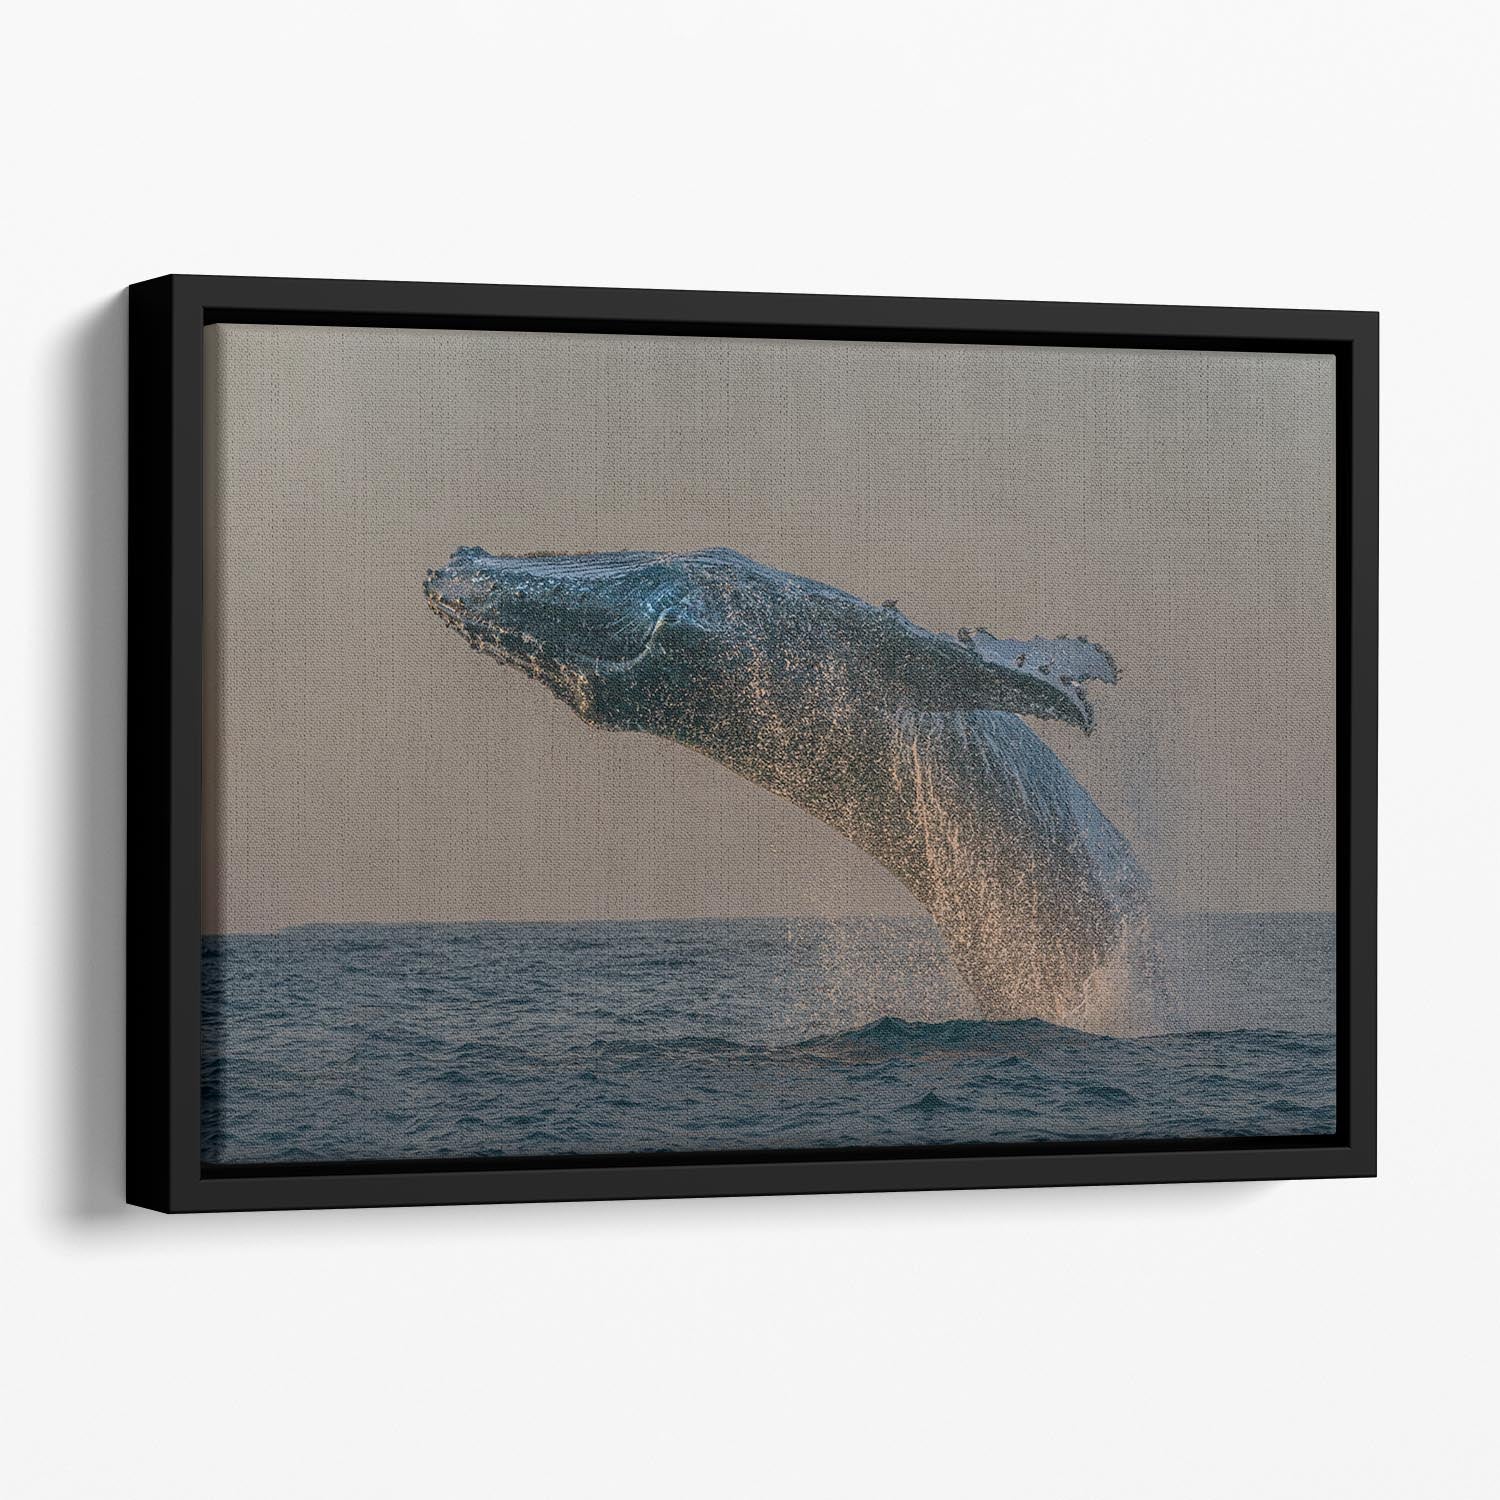 Whale Fliiping Out The Ocean Floating Framed Canvas - Canvas Art Rocks - 1